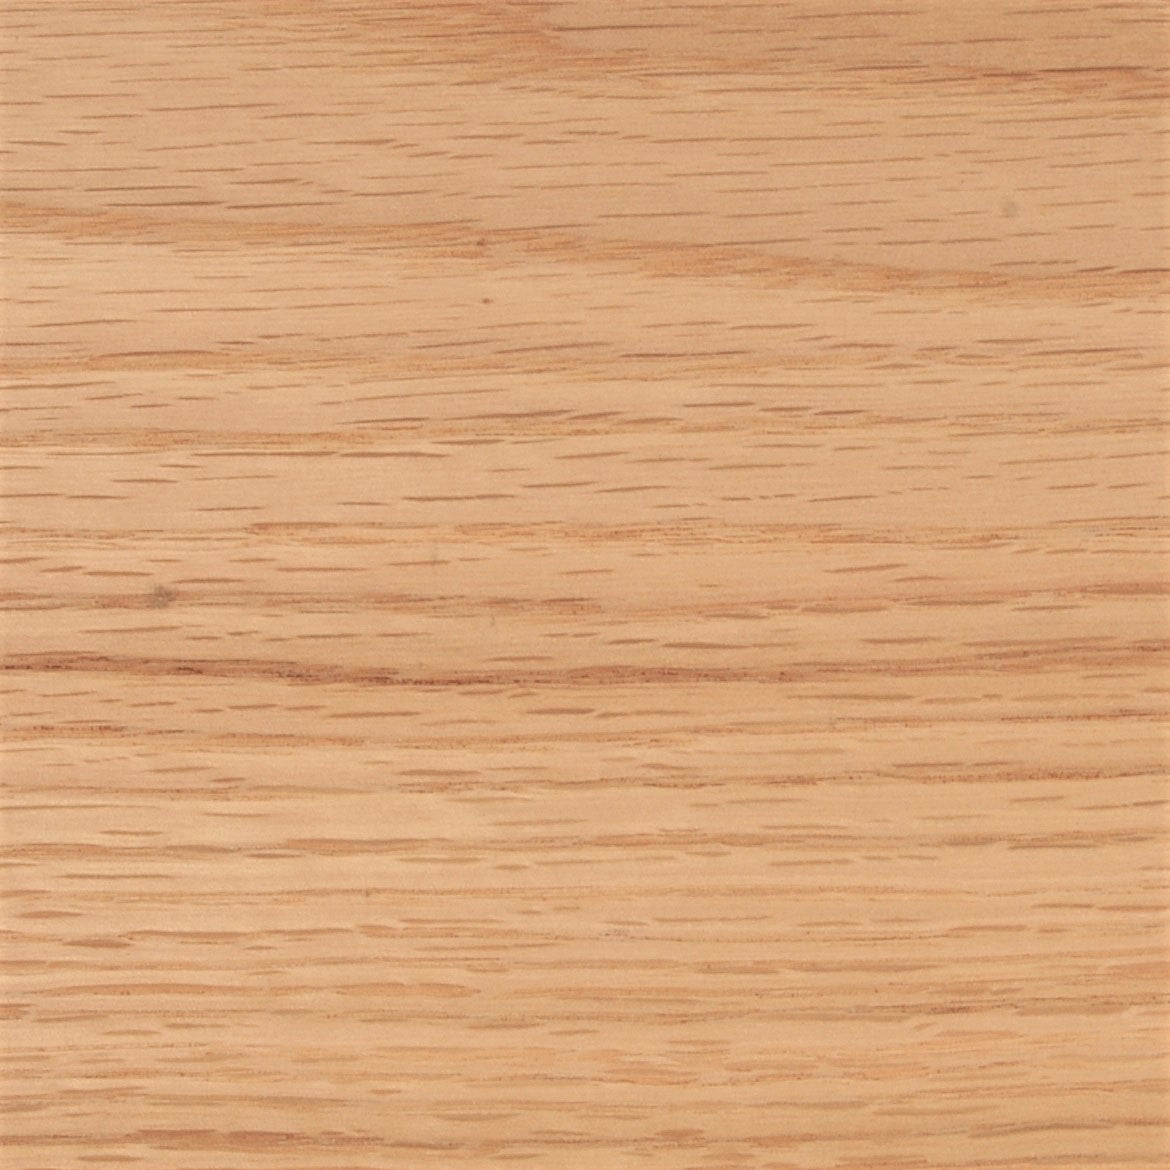 Oak, Red - A&M Wood Specialty